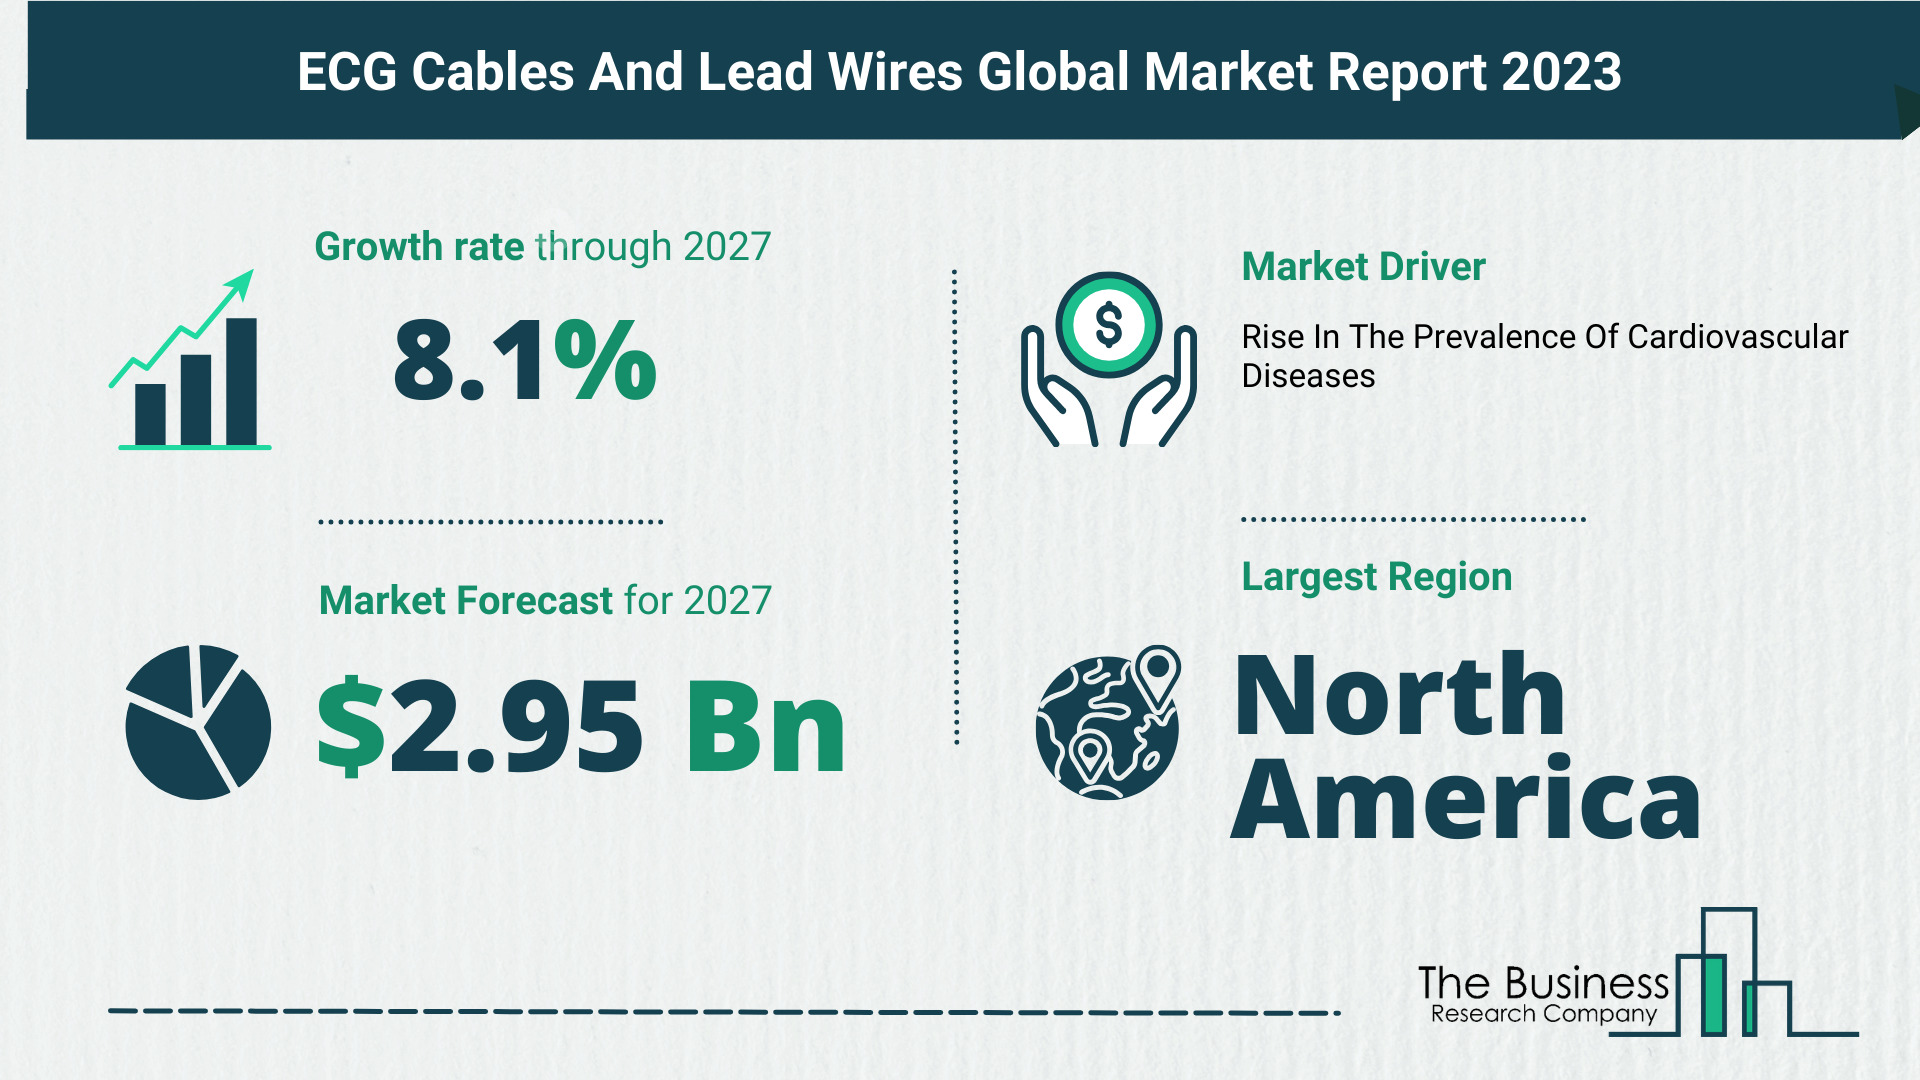 Global ECG Cables And Lead Wires Market Report 2023 – Top Market Trends And Opportunities